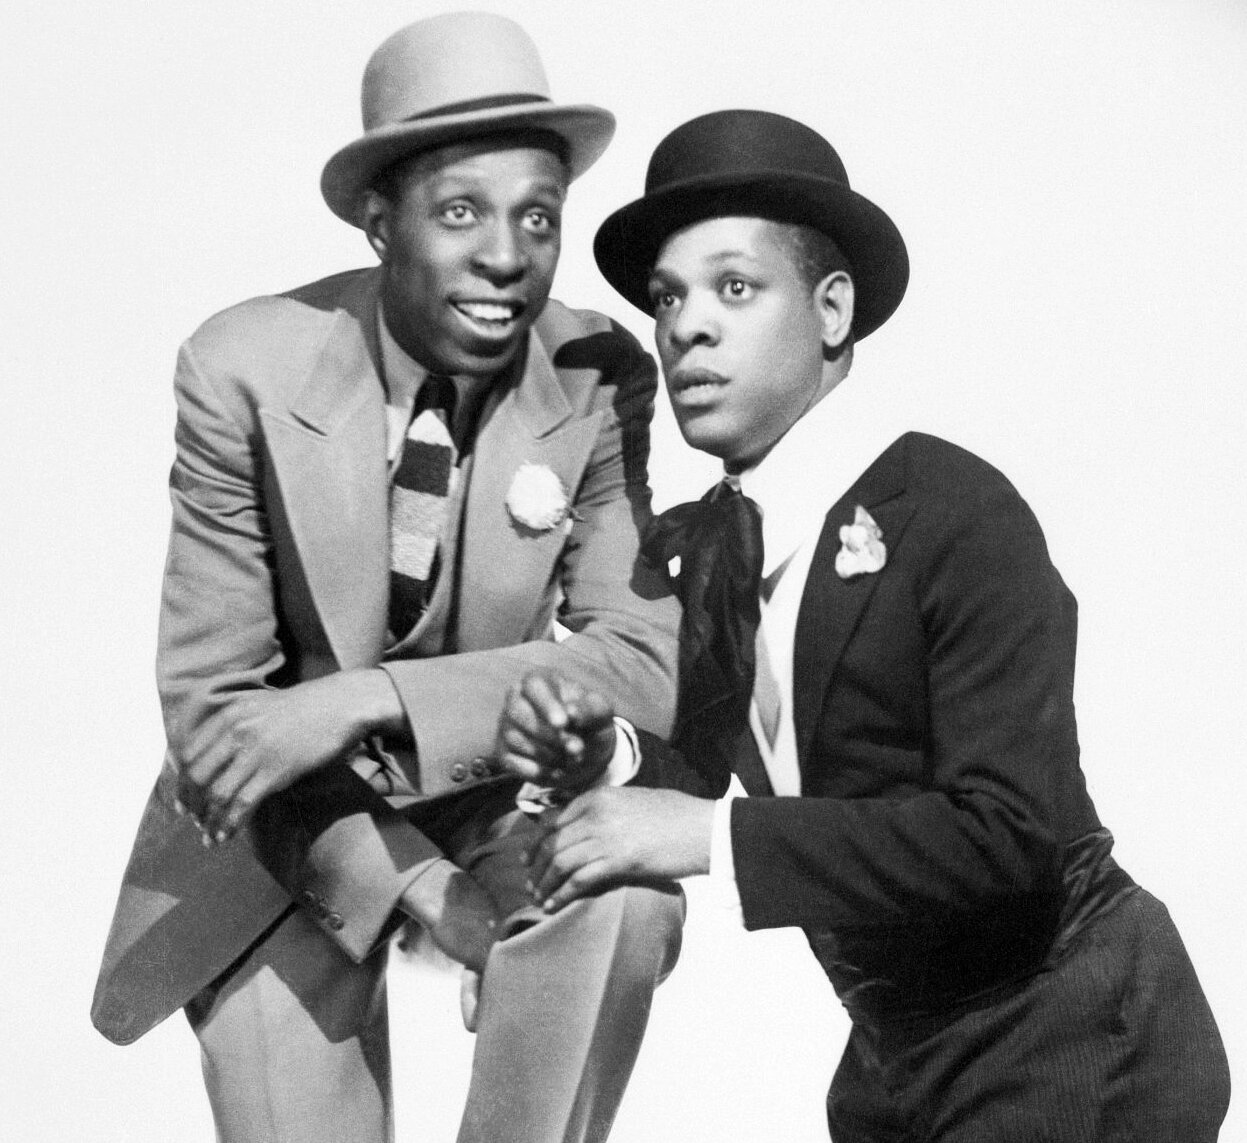  The song and dance team of Buck (Ford Lee Washington), right, and Bubbles (John William Sublett), are shown as they appeared in the early 1920s as top headliners at New York's Palace Theatre, the then mecca of vaudeville. (Photo by UPI/Bettmann via 